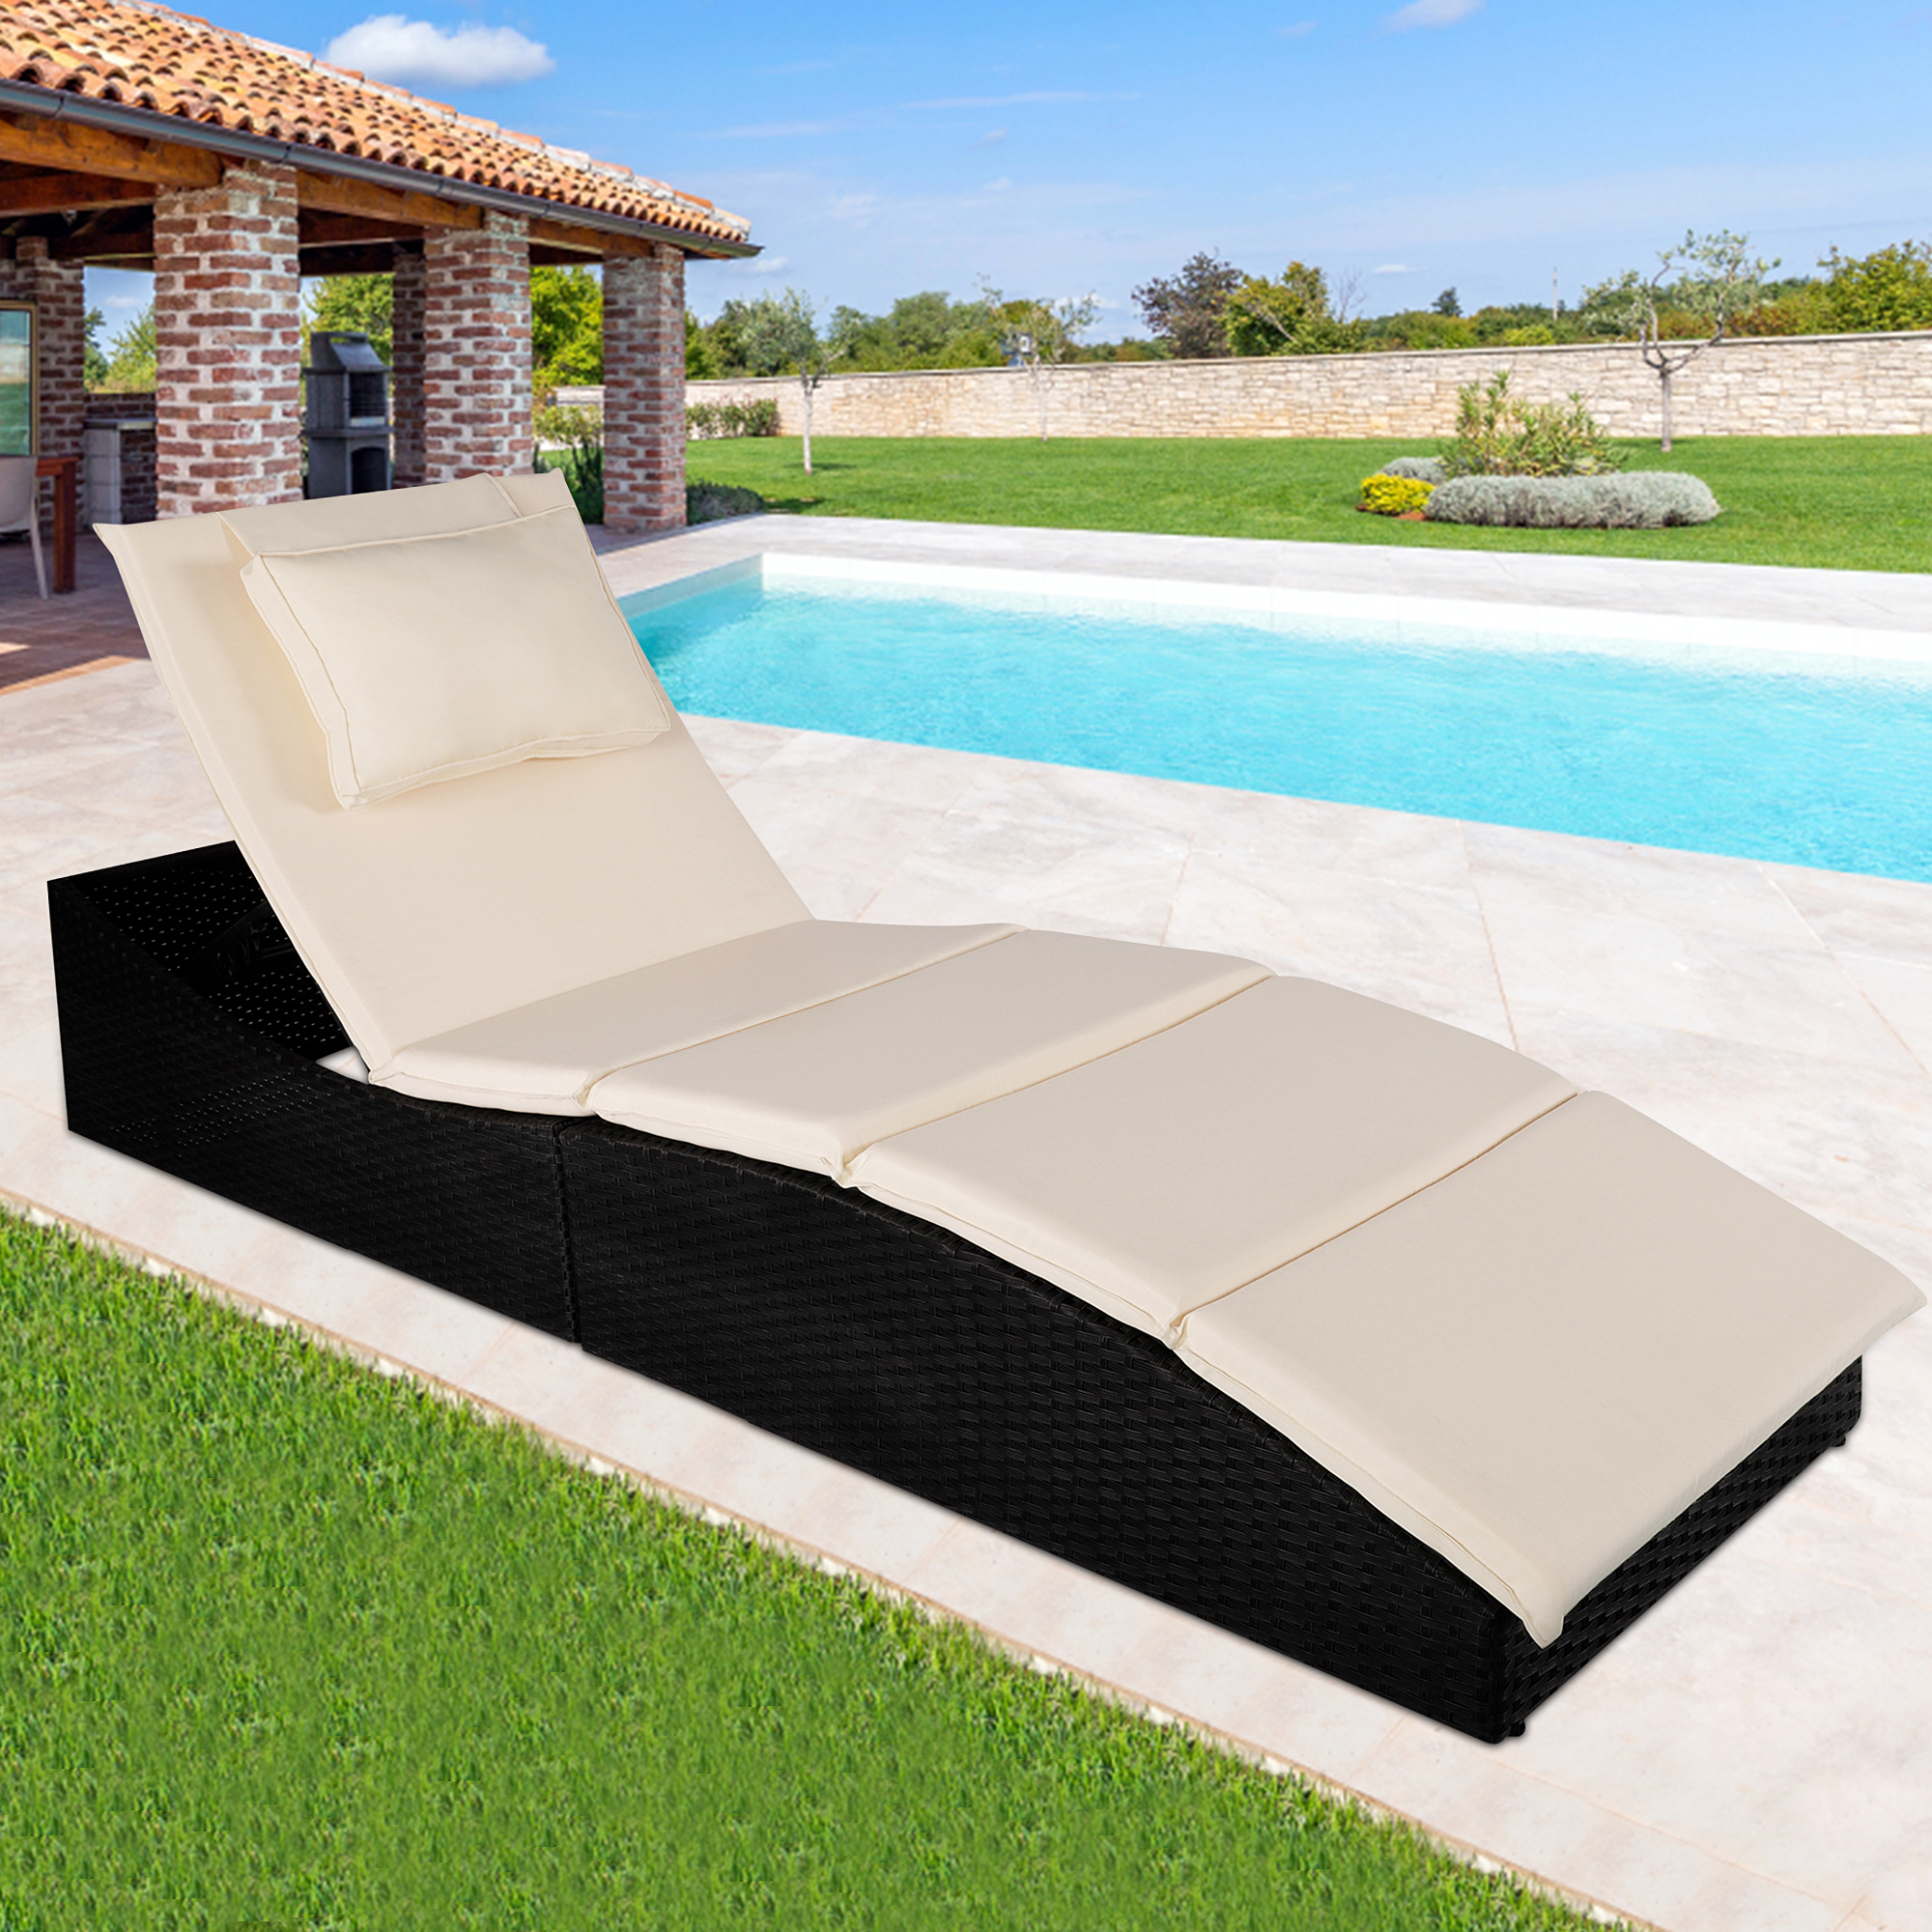 Chaise Lounge Chair Outdoor, enyopro Wicker Patio Chaise Lounger with Cushion, All-Weather Adjustable Sun Chaise Lounge Furniture, Reclining Backrest Chaise Lounge for Yard Pool Porch Garden, K3721 - image 2 of 9